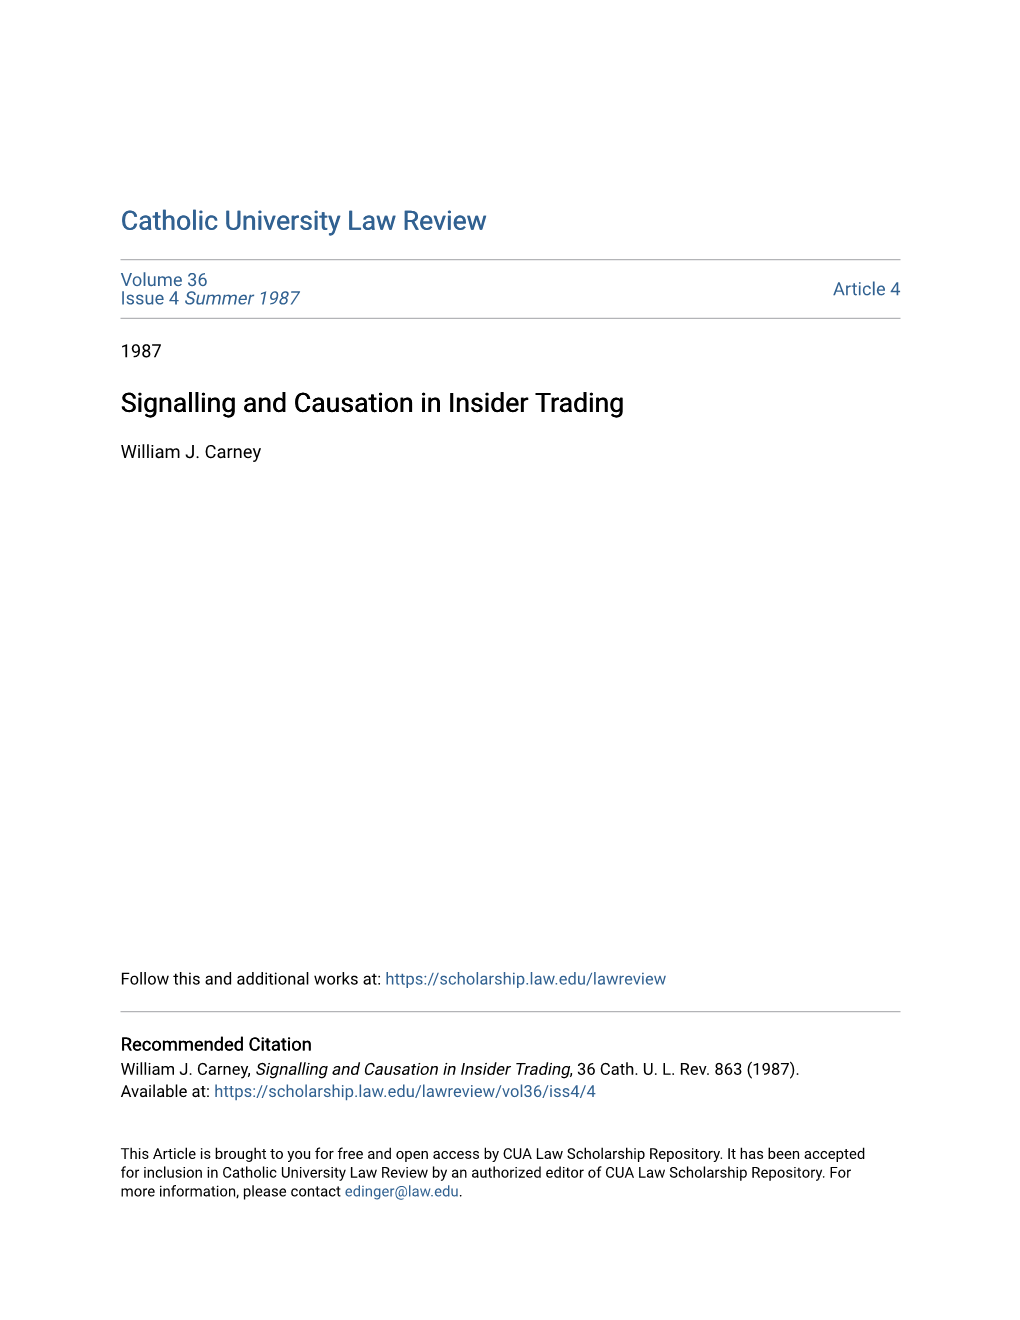 Signalling and Causation in Insider Trading